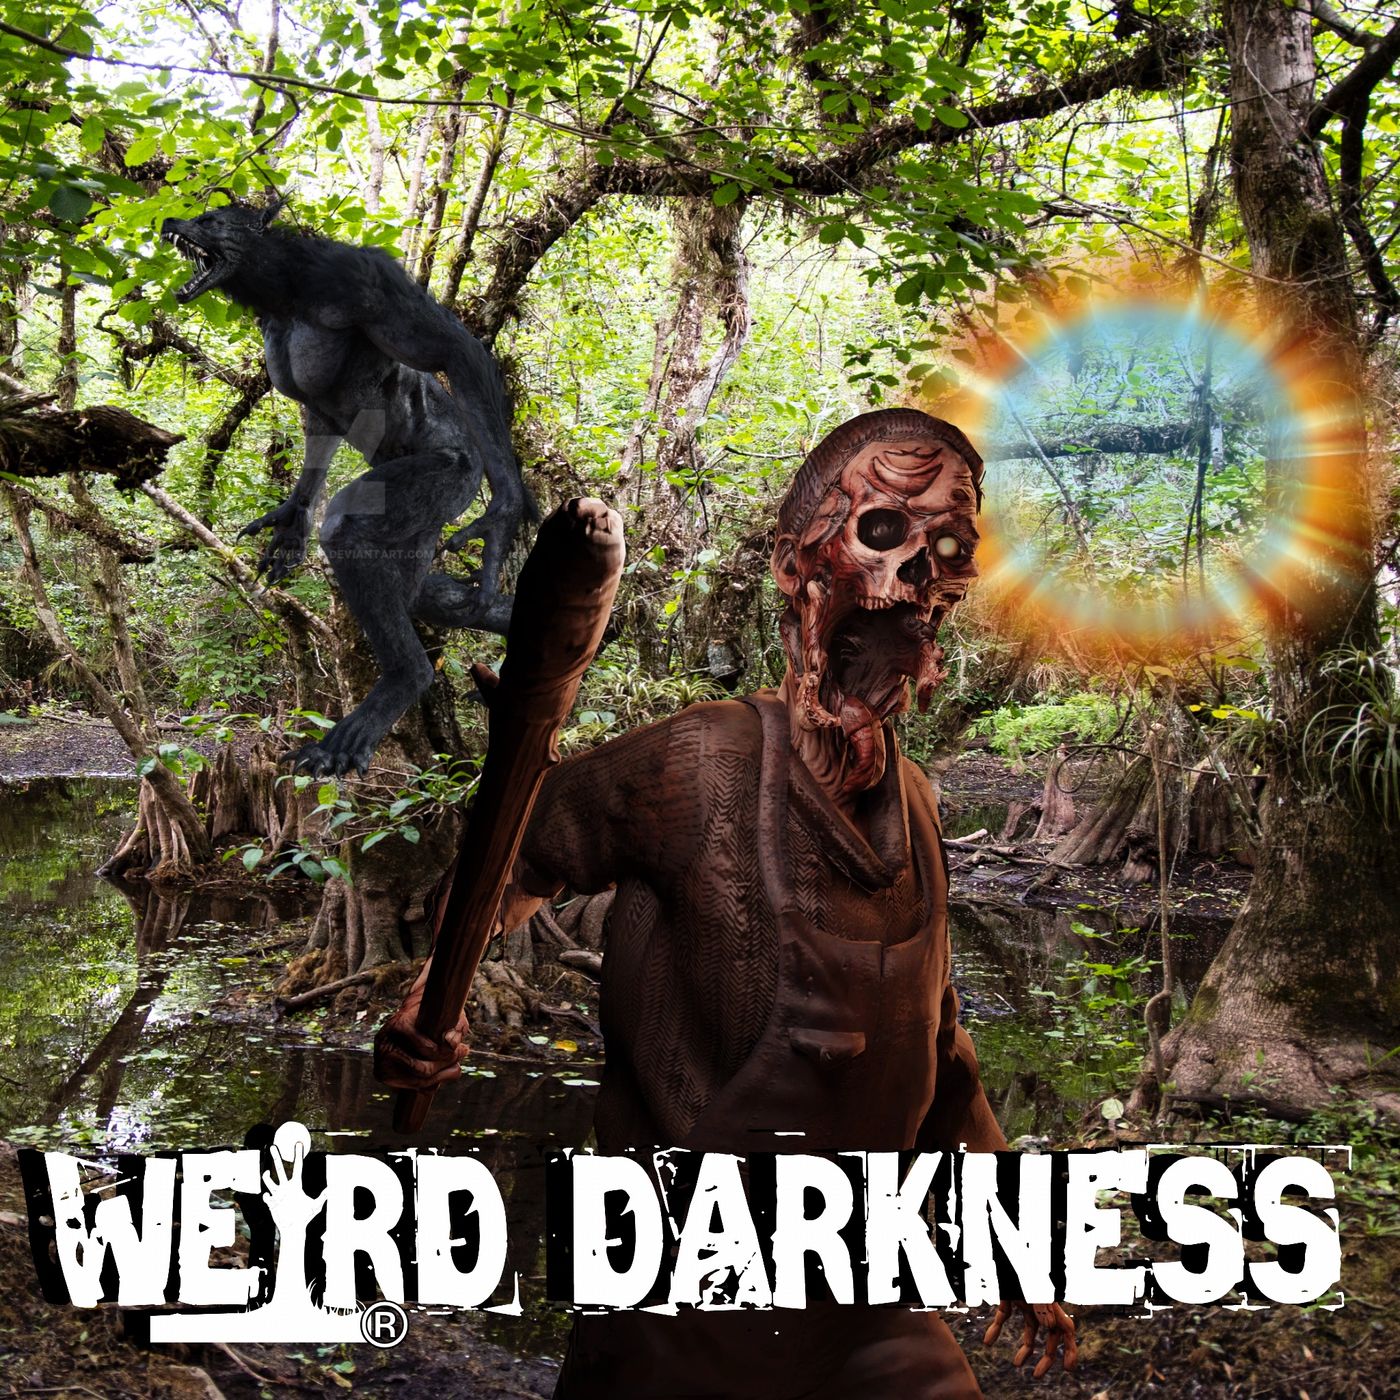 “CREEPY SWAMP LEGENDS OF LOUISIANA” and More True Scary Tales! #WeirdDarkness #Darkives